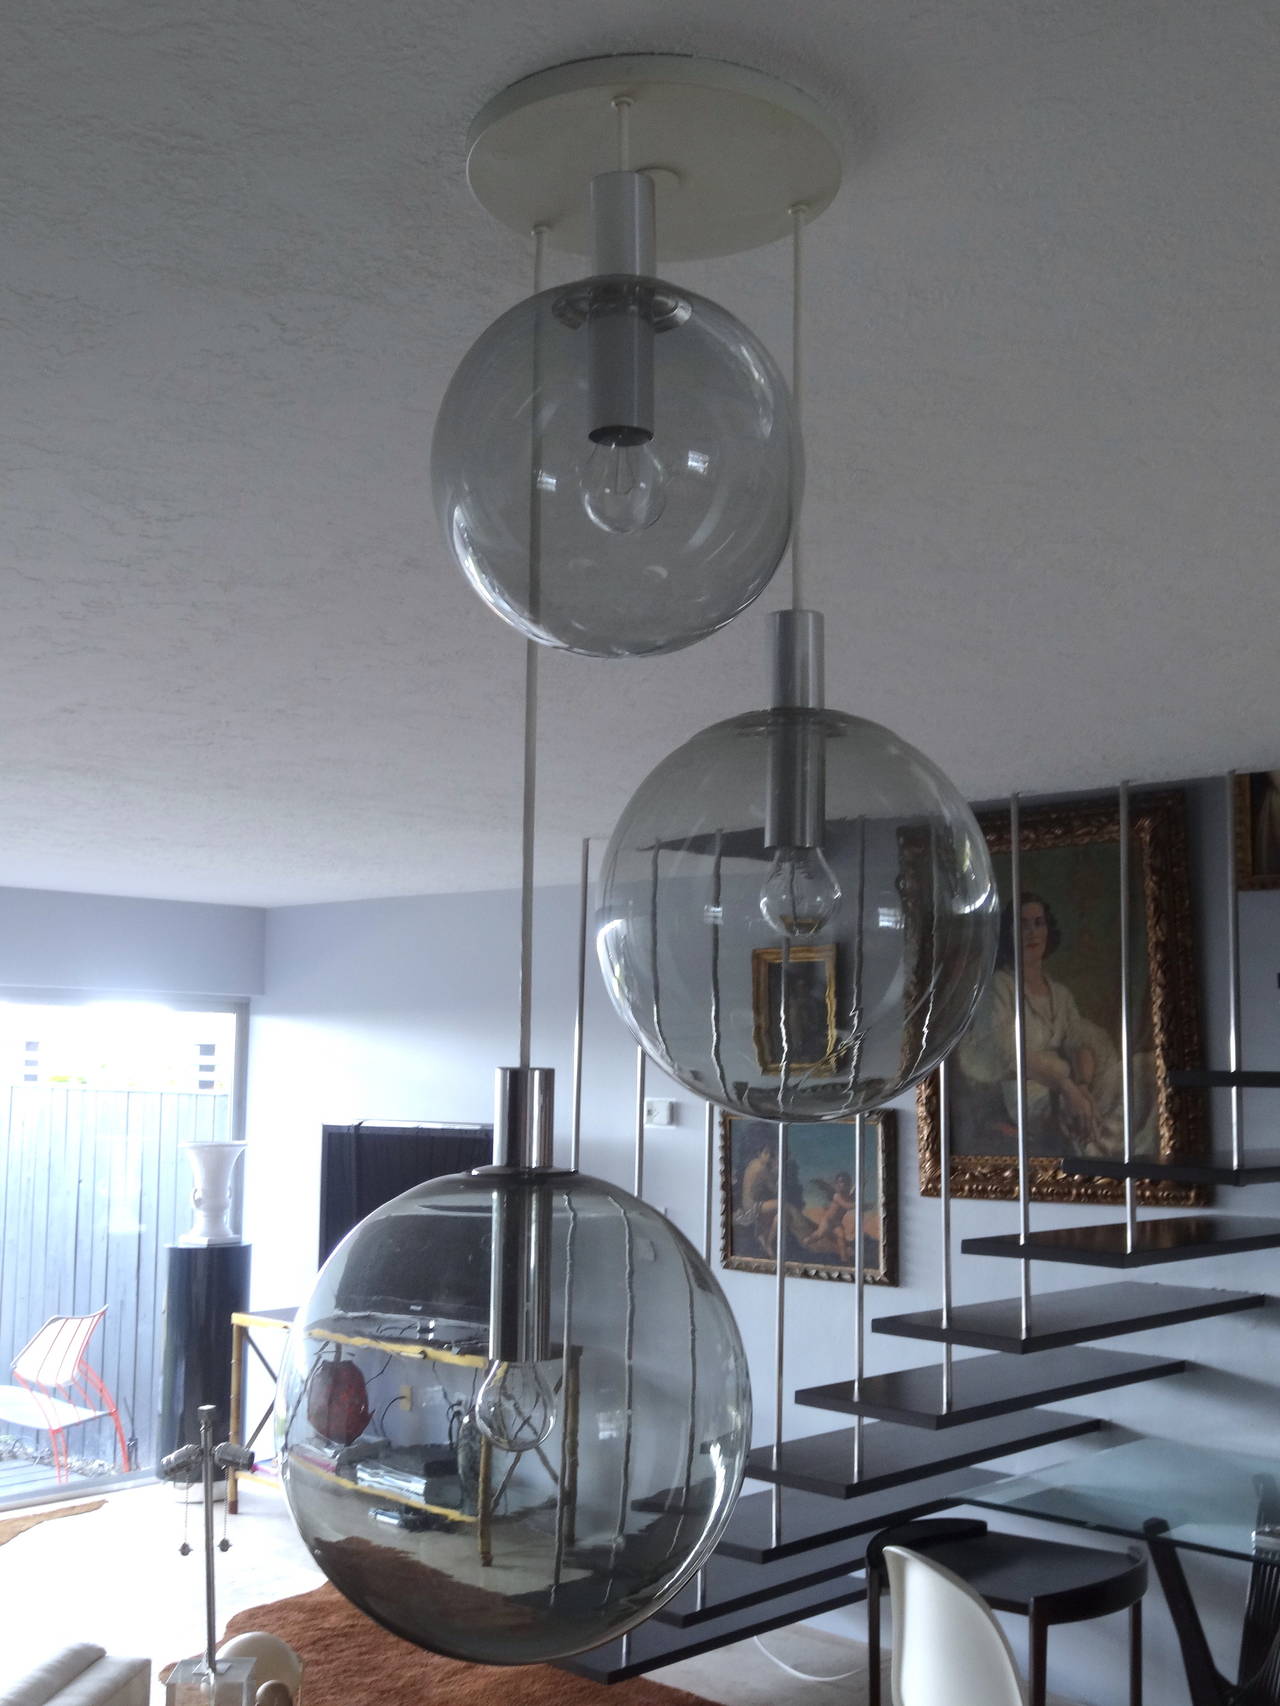 smoked glass chandelier